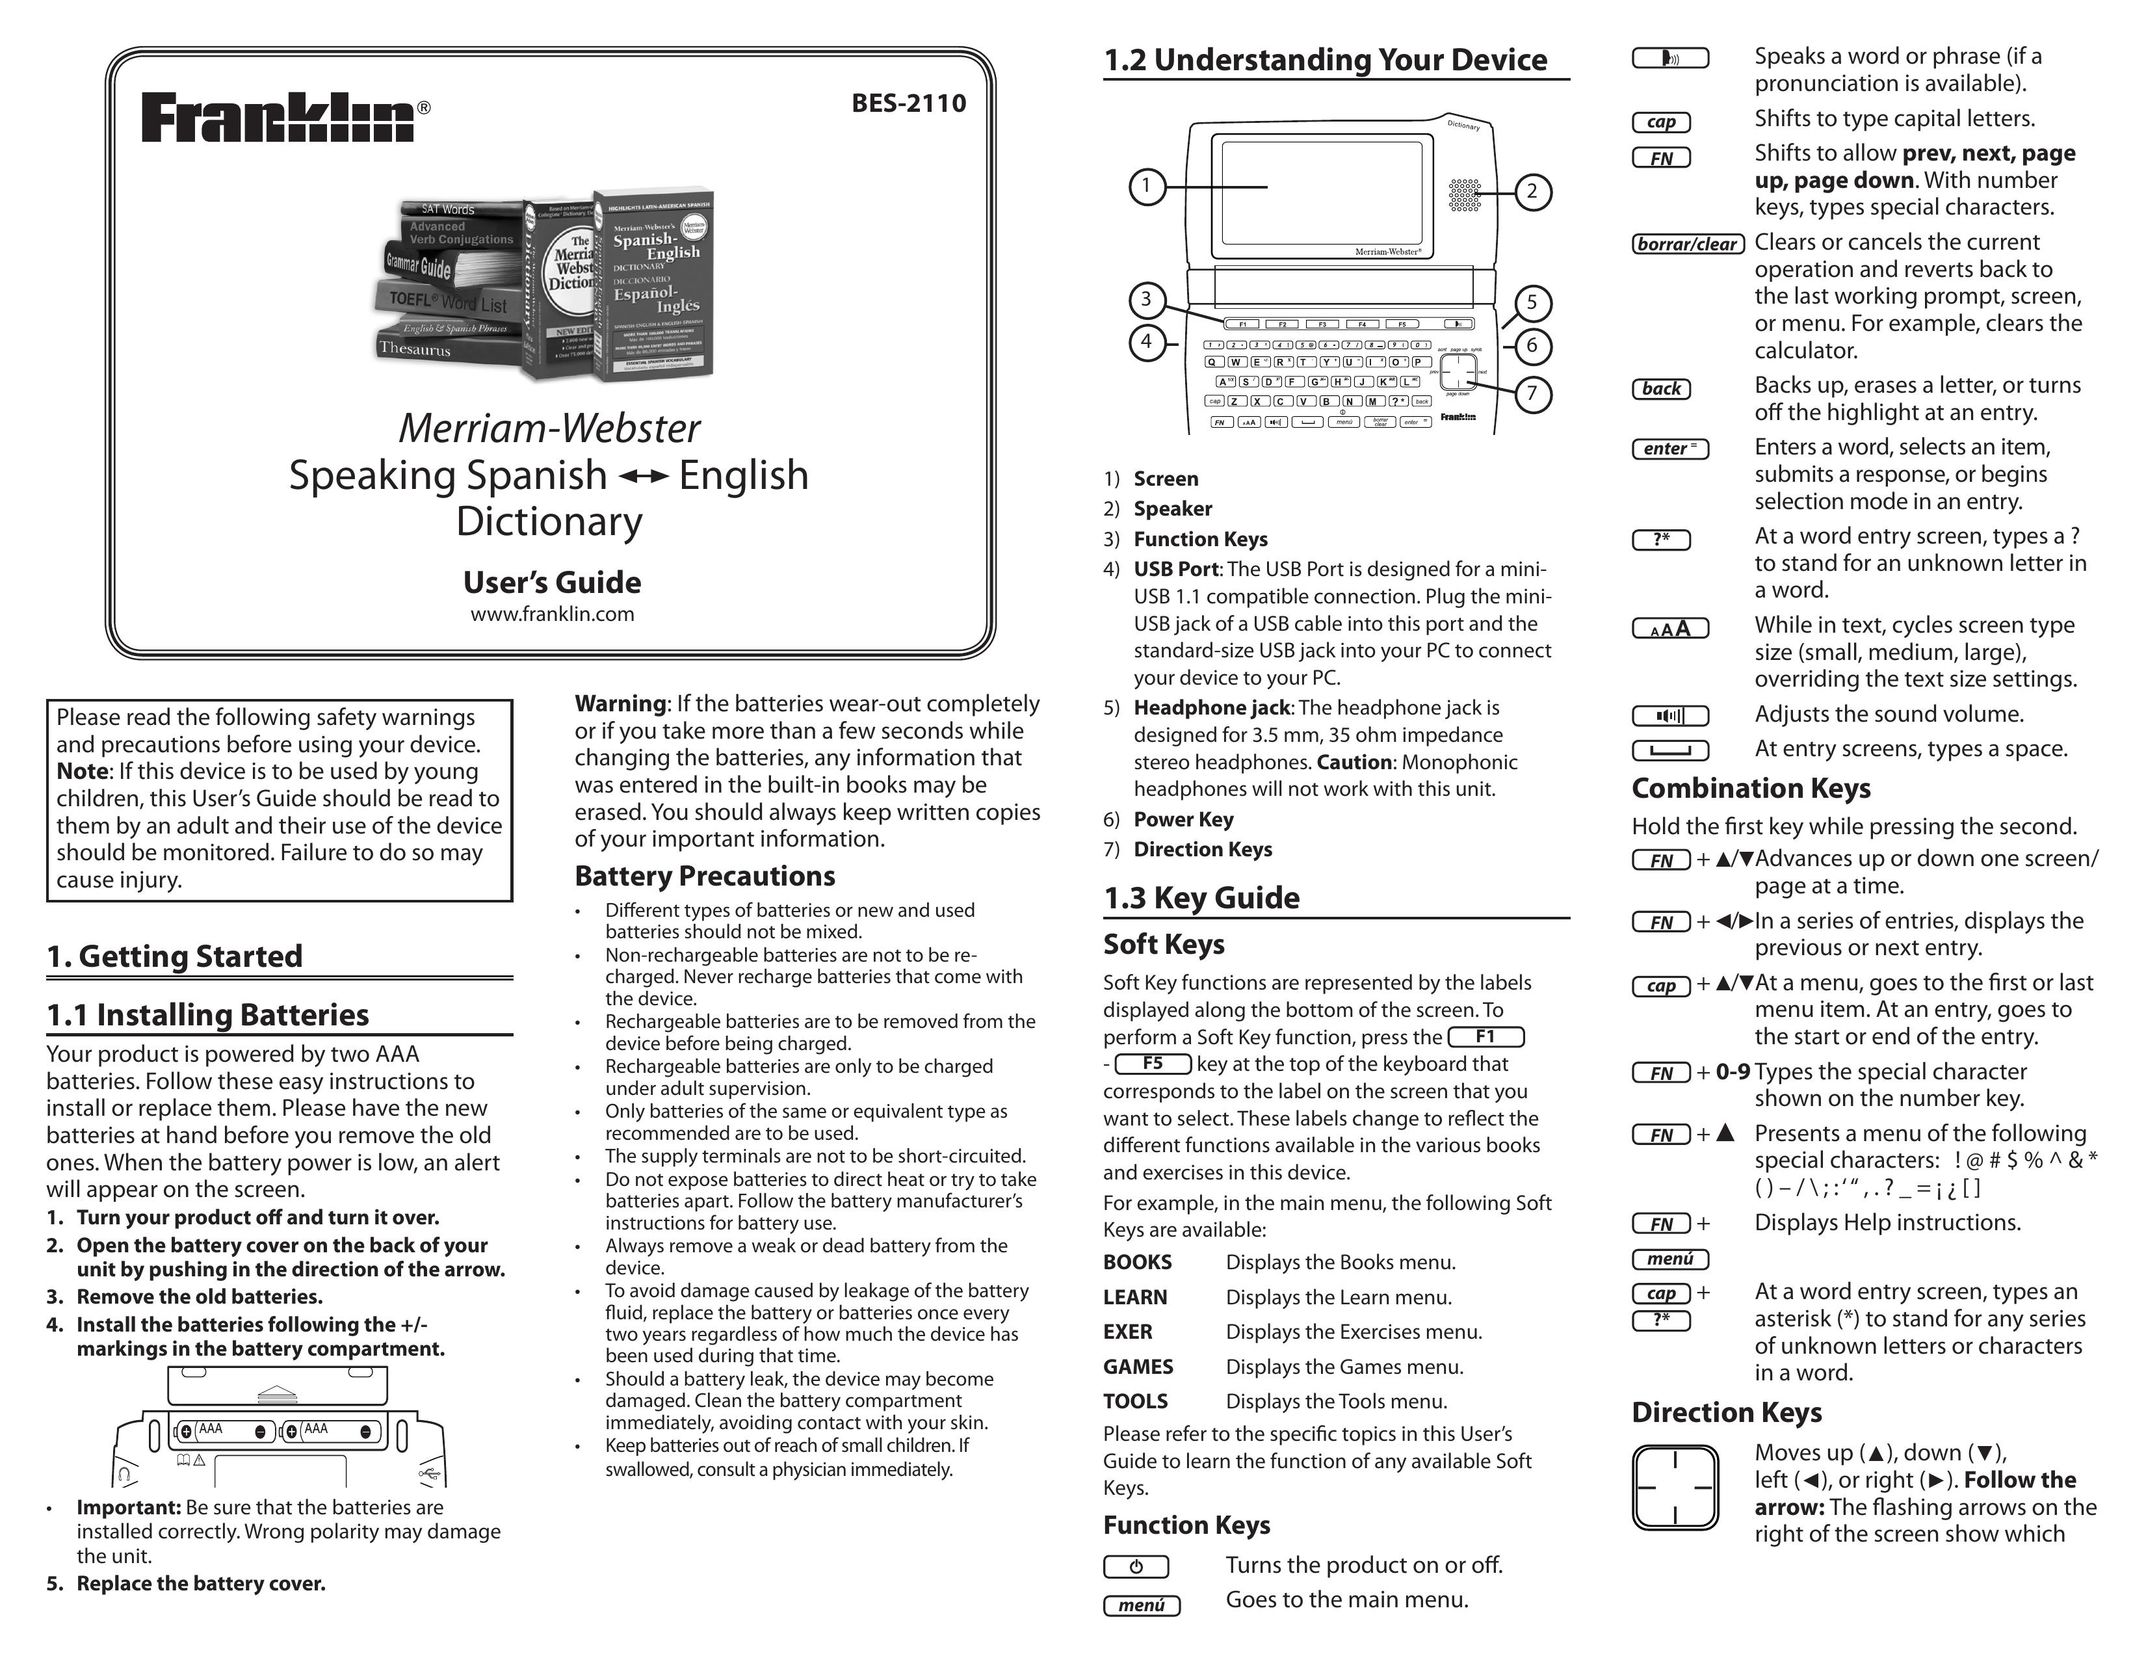 Franklin Merriam-Webster Speaking Spanish - English Dictionary Handheld Game System User Manual (Page 1)